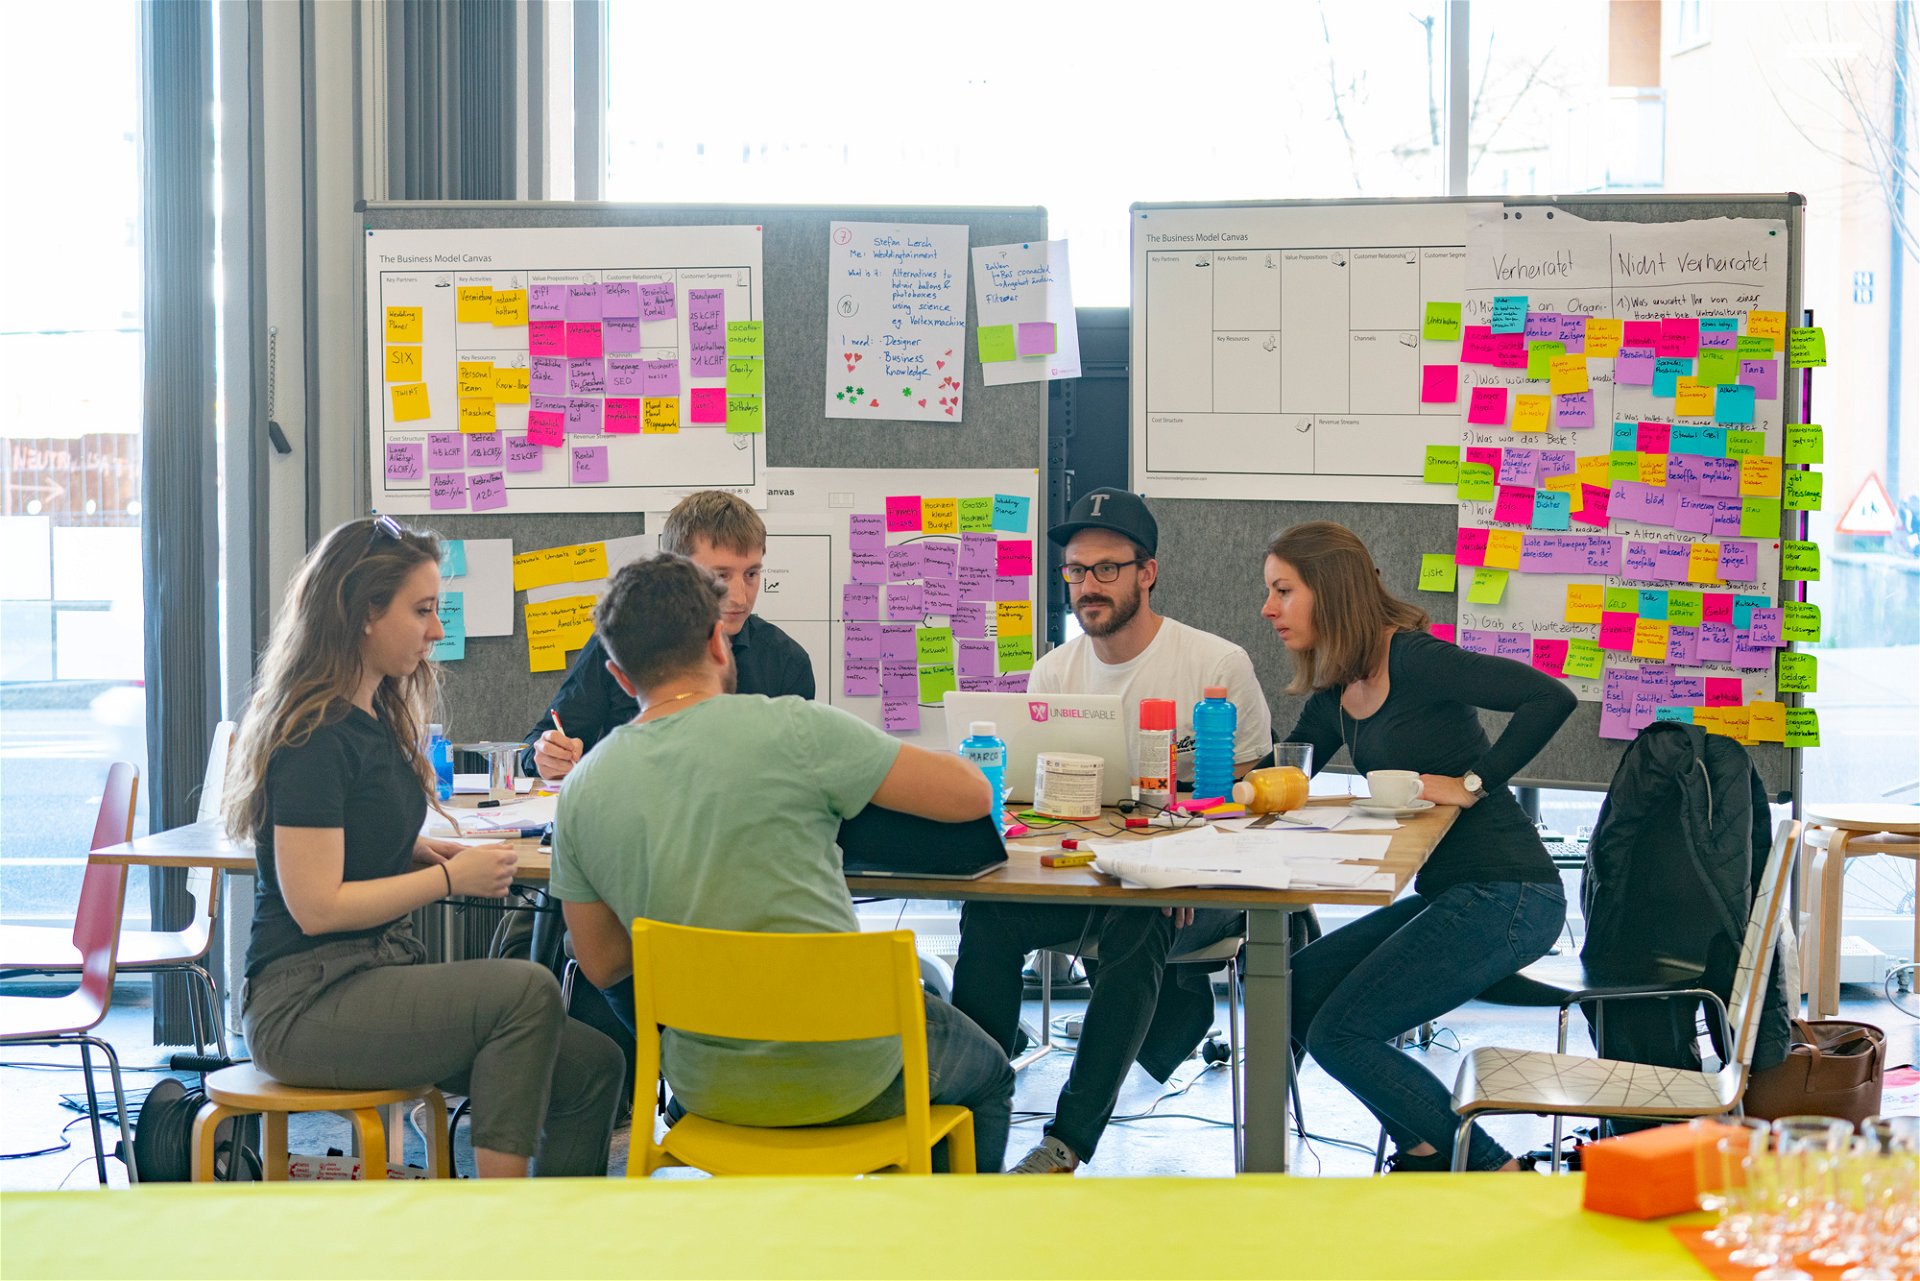 With methods like design thinking we find the right solution together.